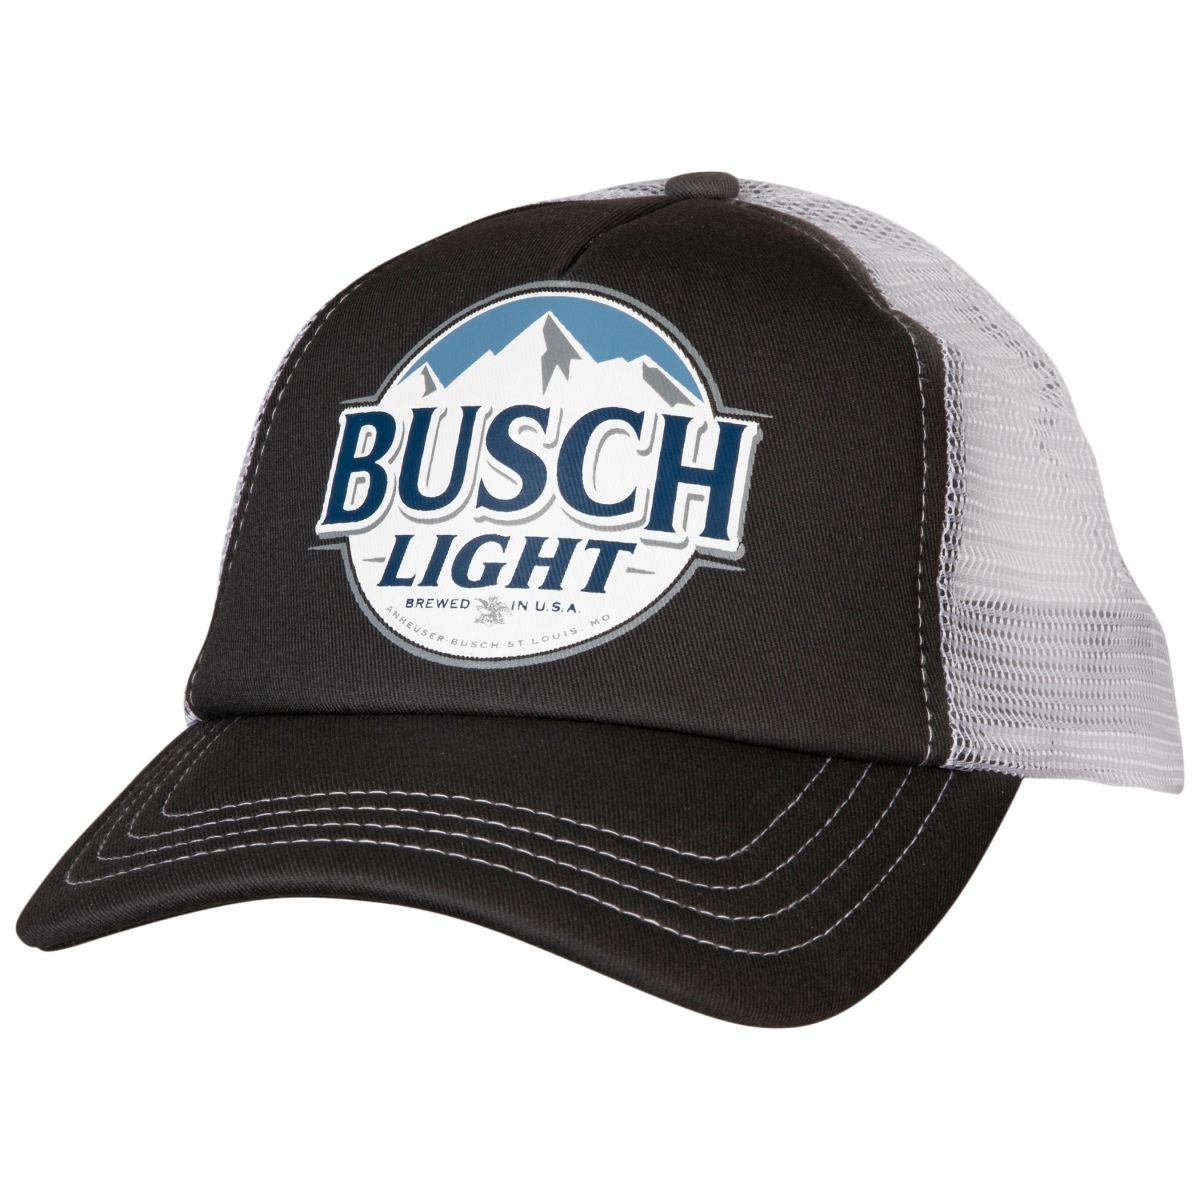 Picture of Busch 817721 Light Curved Brim Snapback Hat